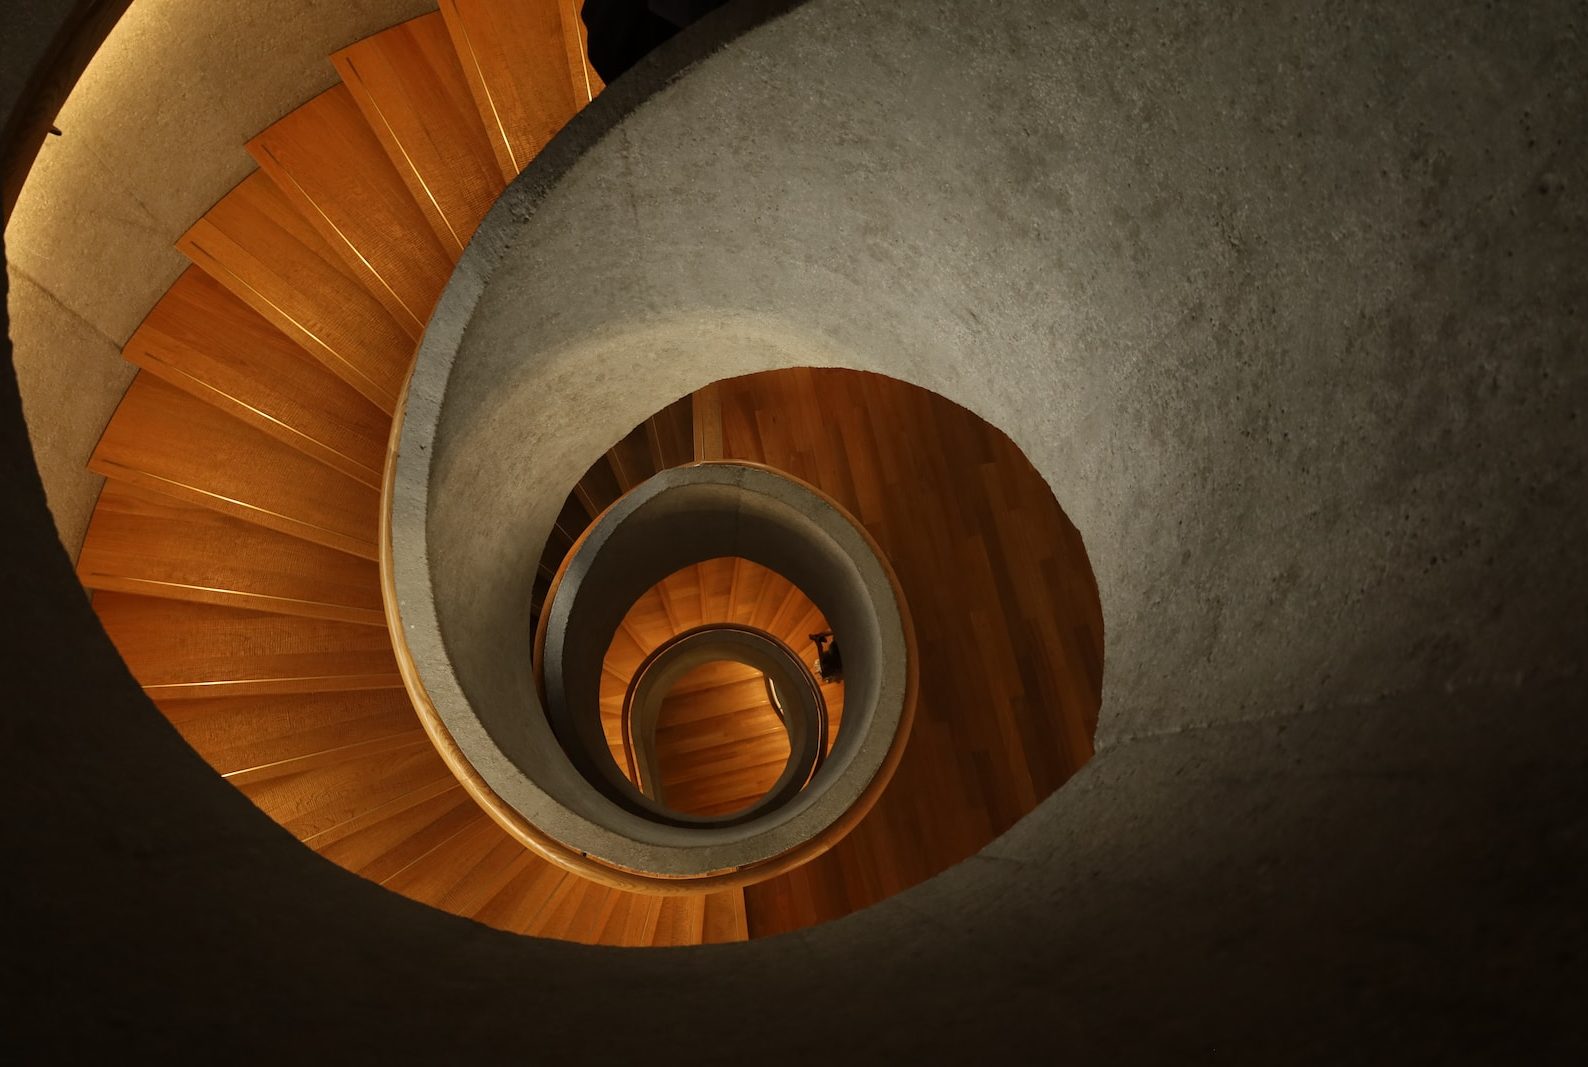 a spiral staircase with a person walking up it